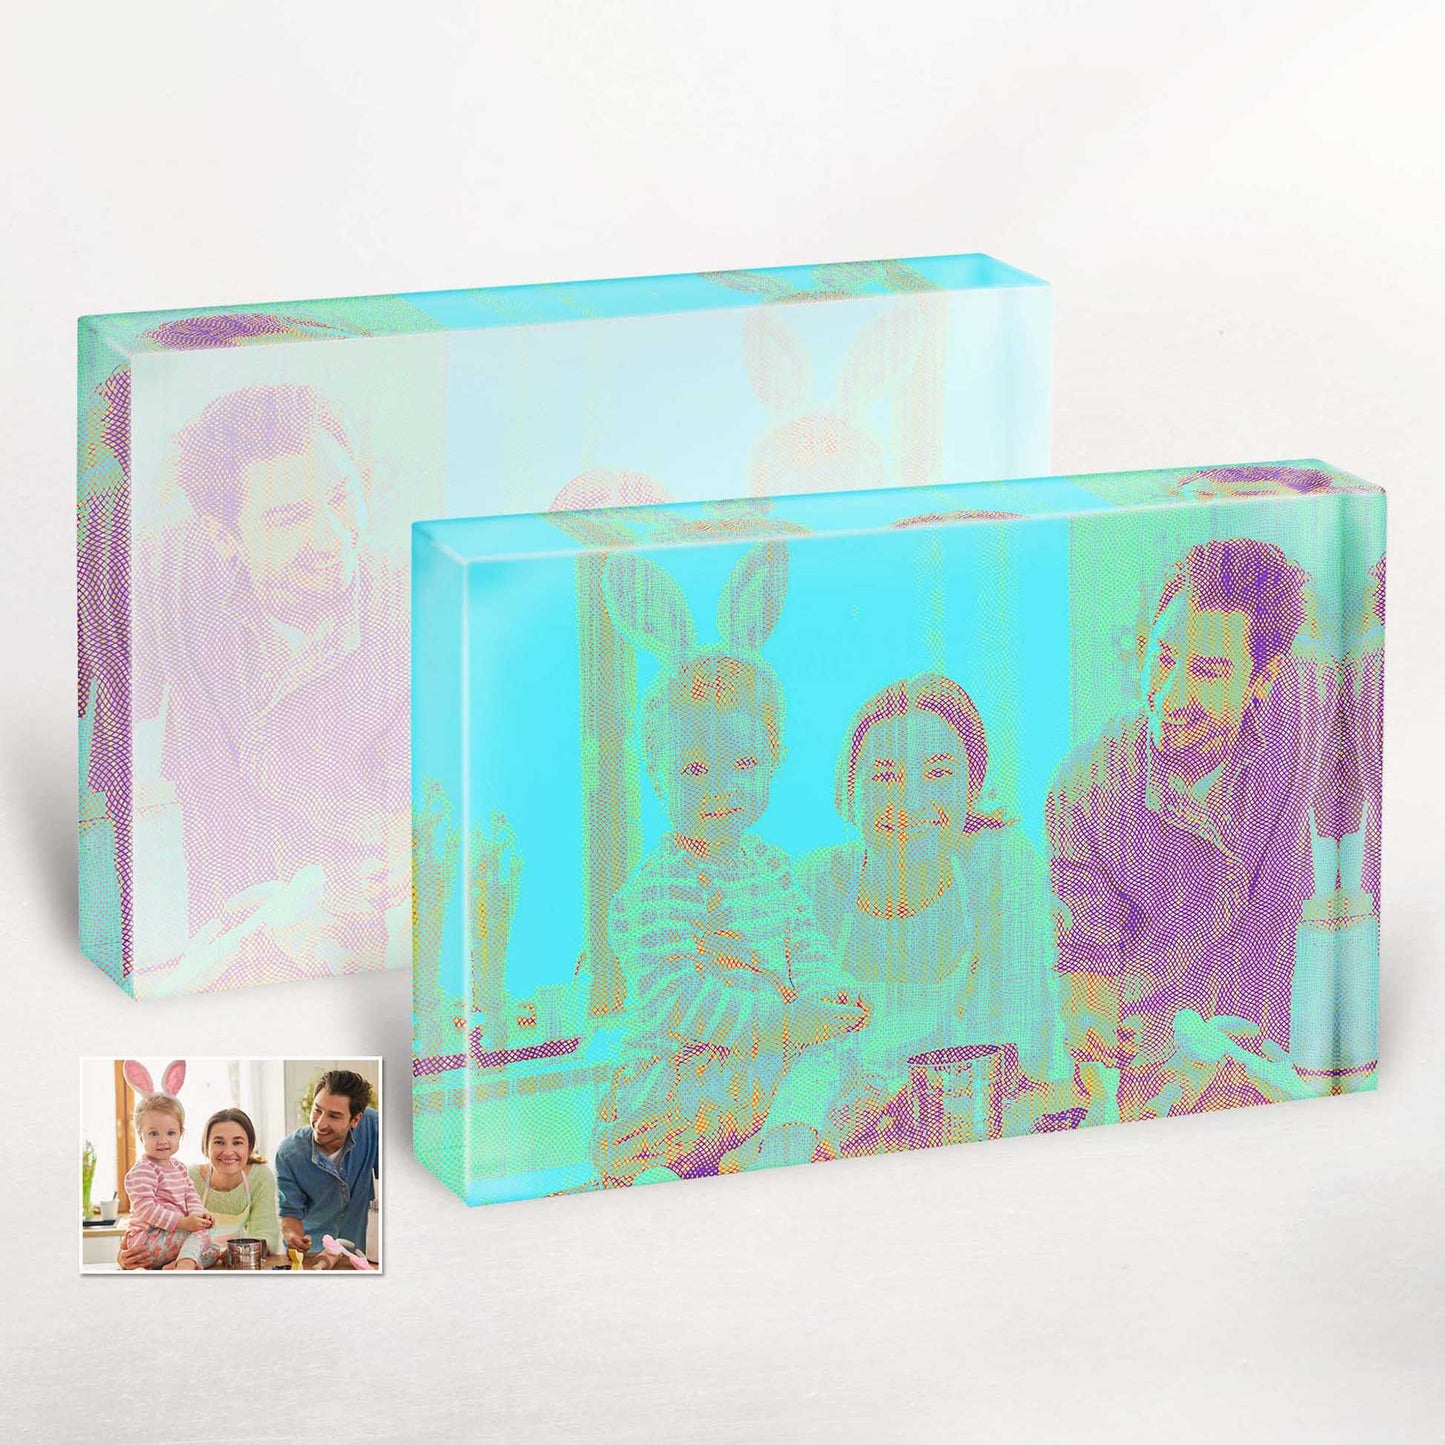 Cool and Hip: Personalised Blue Engraved Acrylic Block Photo. Elevate your boyfriend's gift with a unique and trendy engraved photo. The blue tint adds a touch of sophistication to any modern home decor.